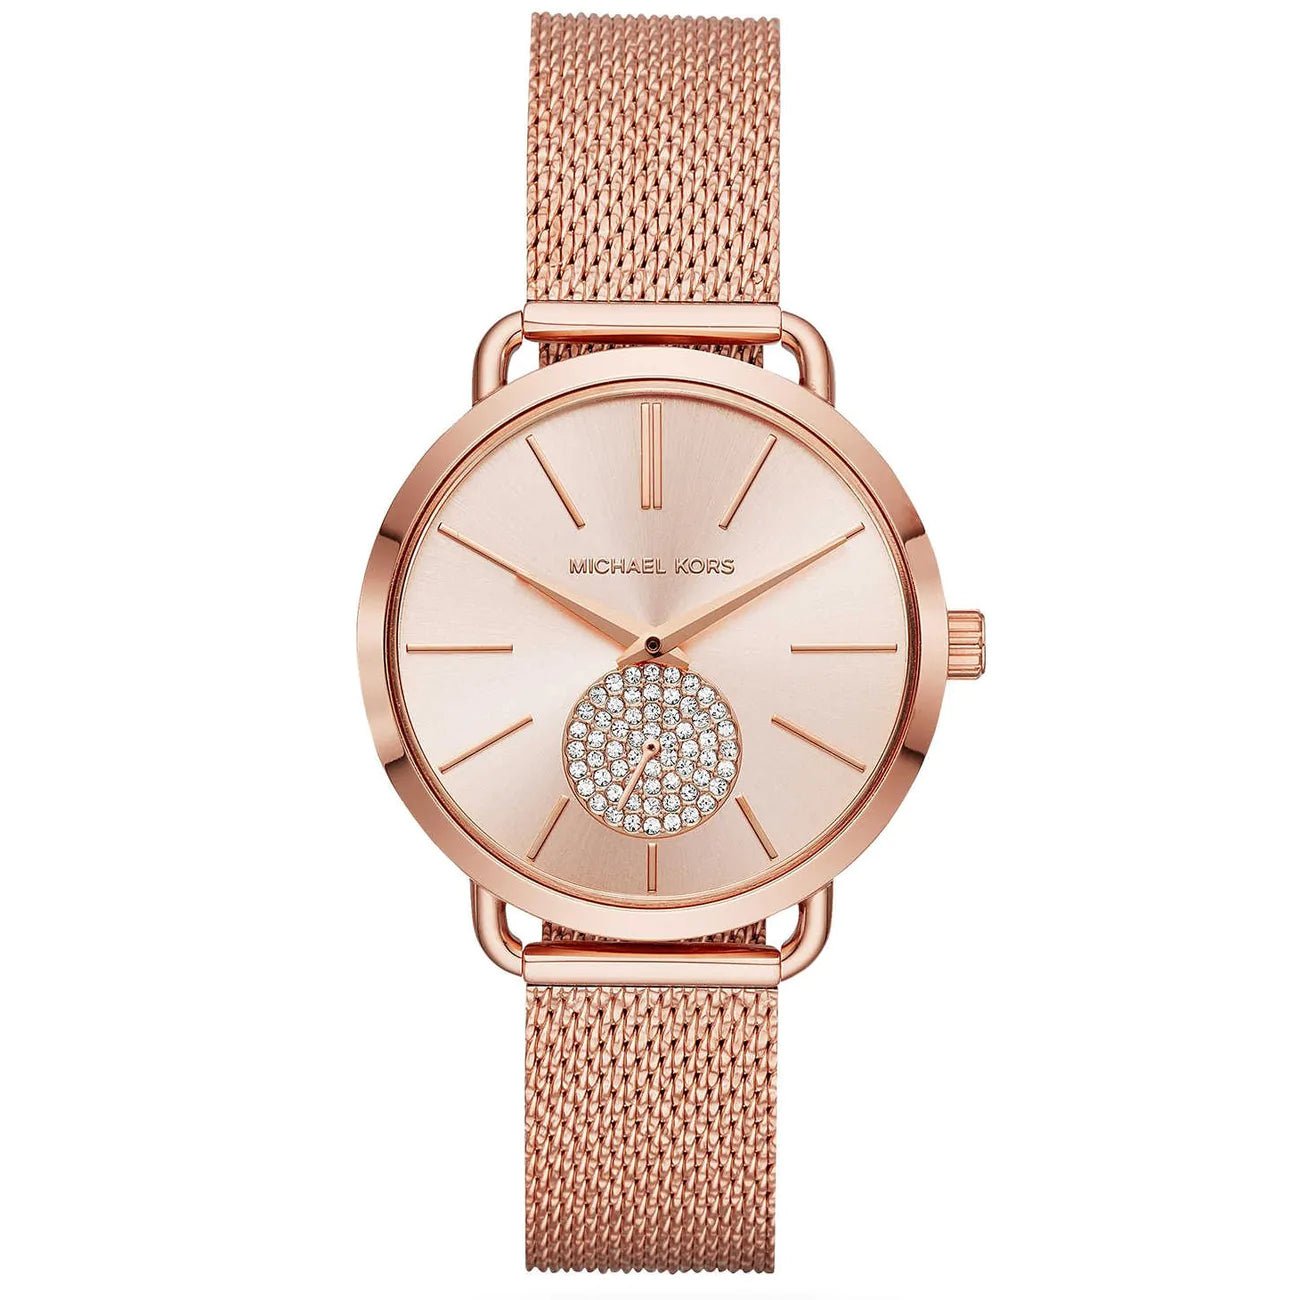 Designer Womens Watches on Sale | Watches & Crystals – tagged 